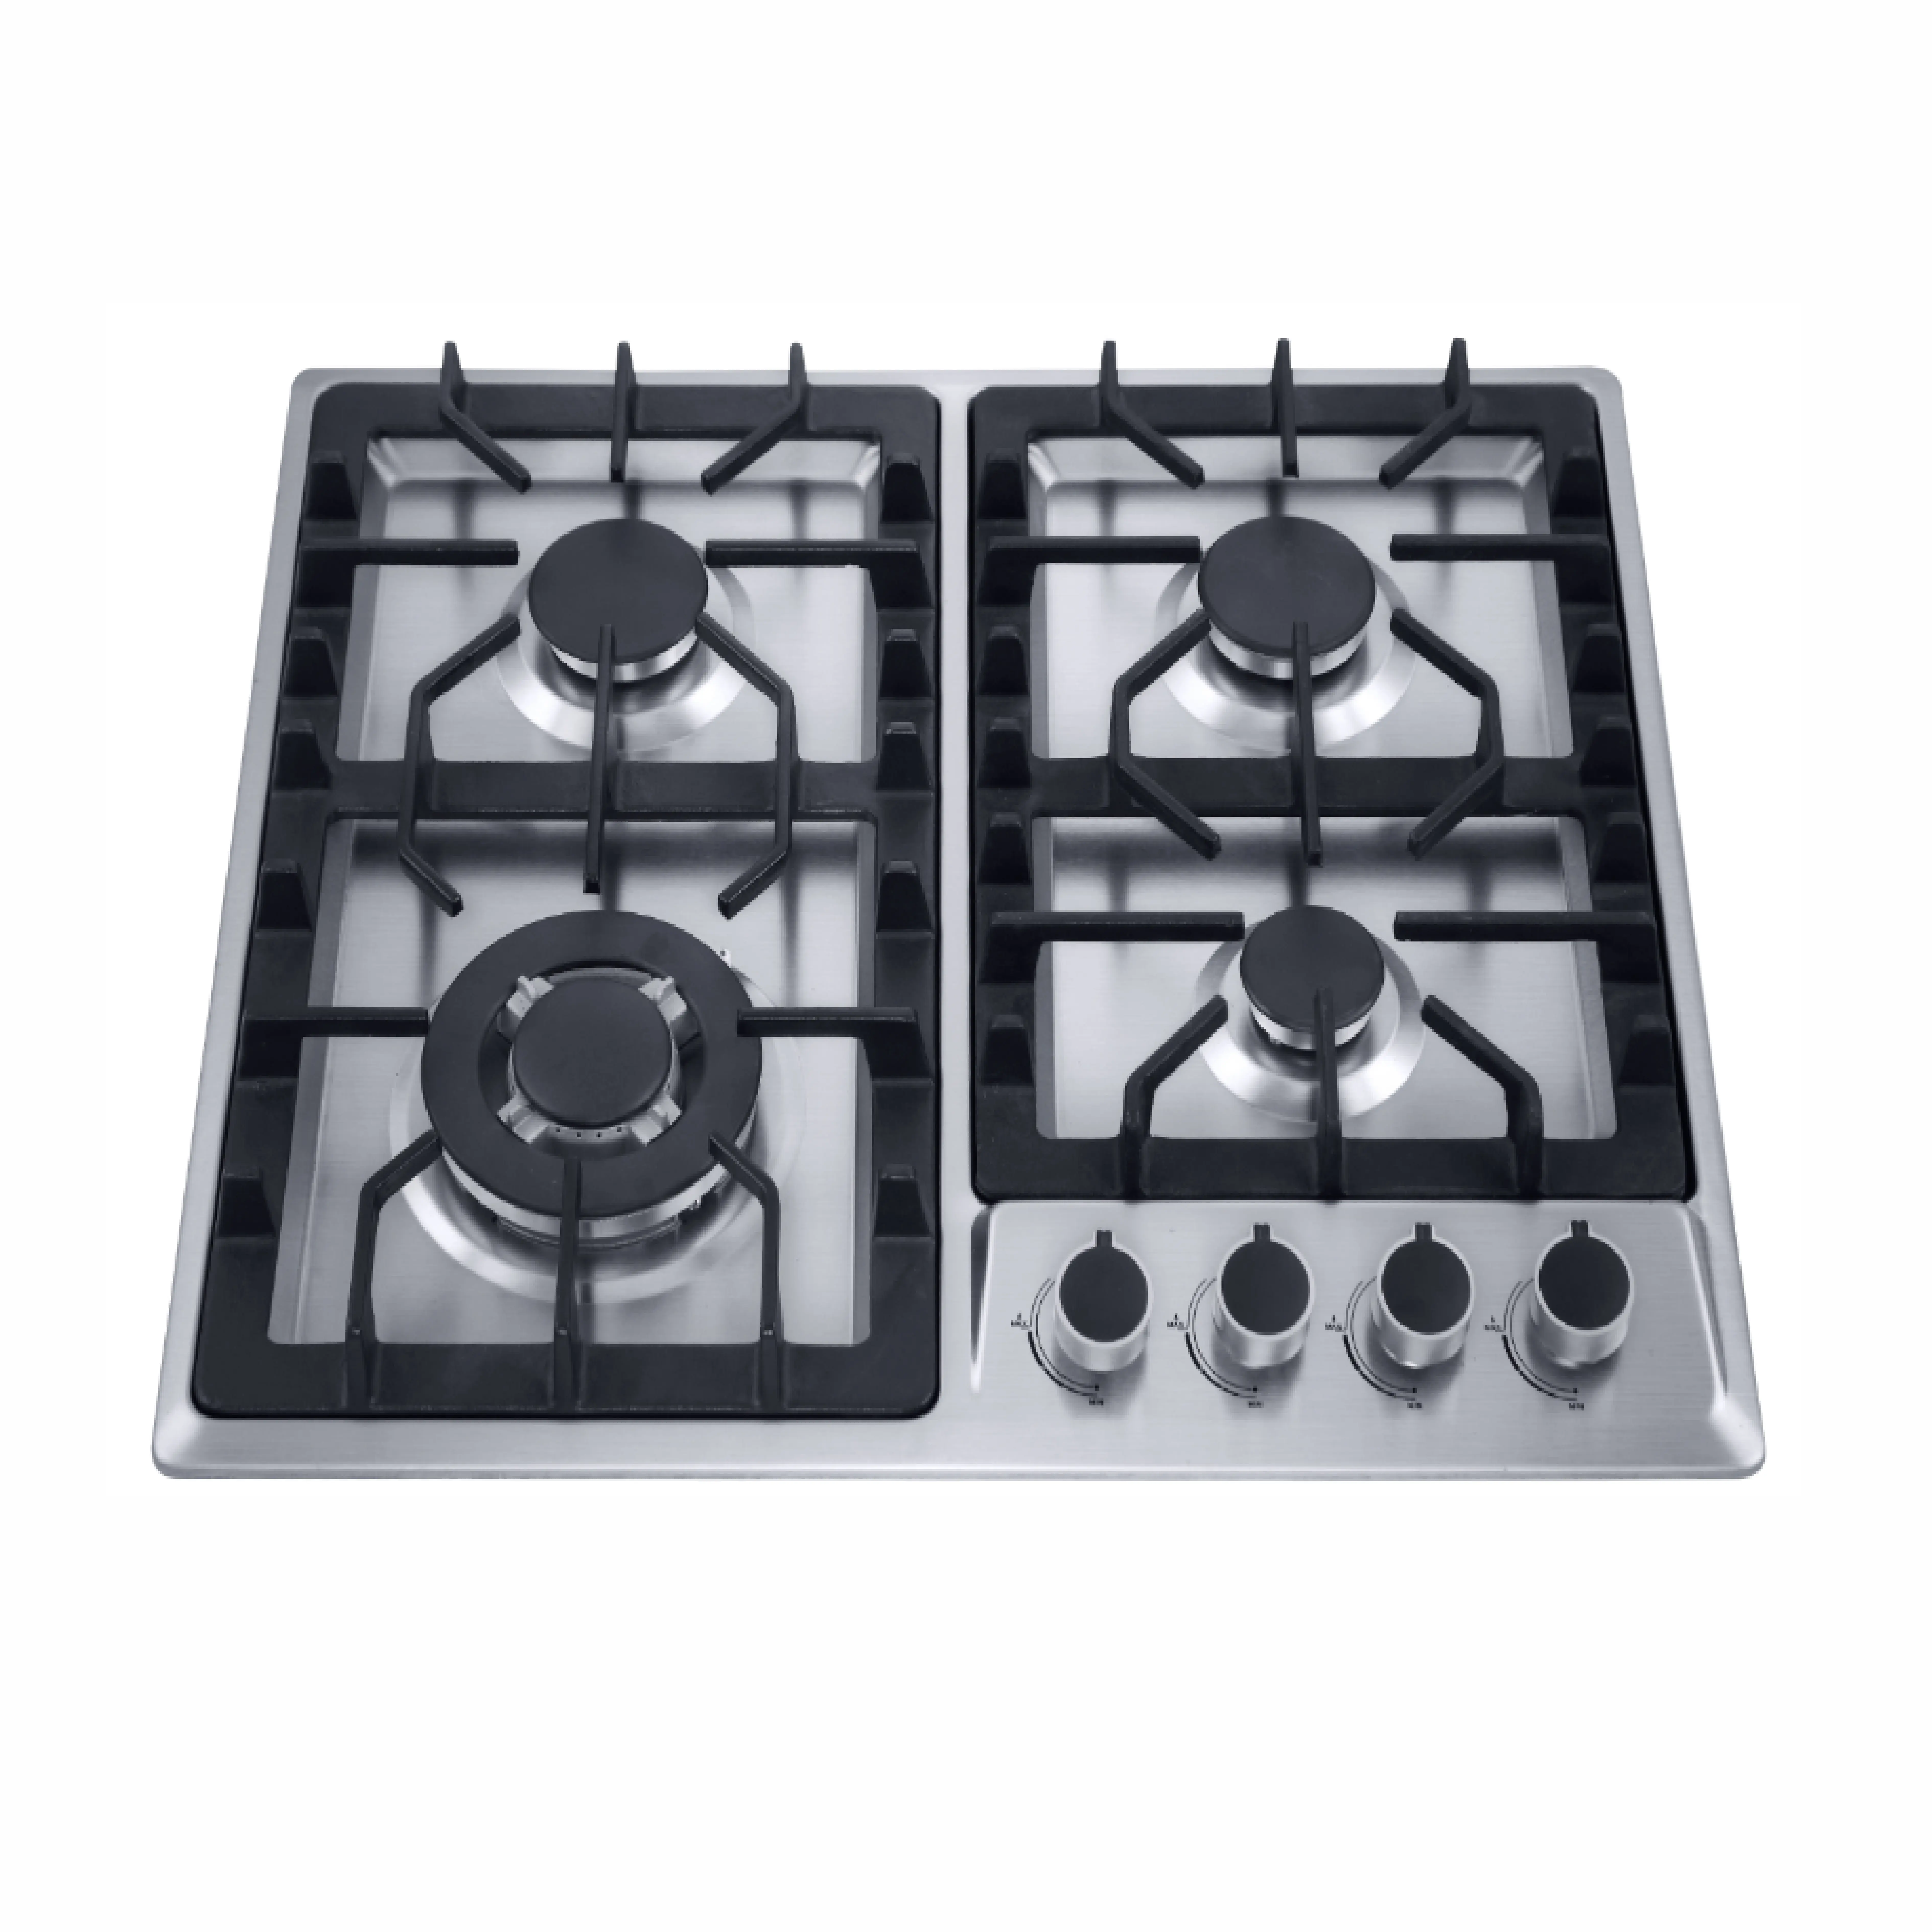 4 Burner Wholesale High Quality Black Cooktops China Home Appliances Kitchen Equipment New Products On Market Stove Gas